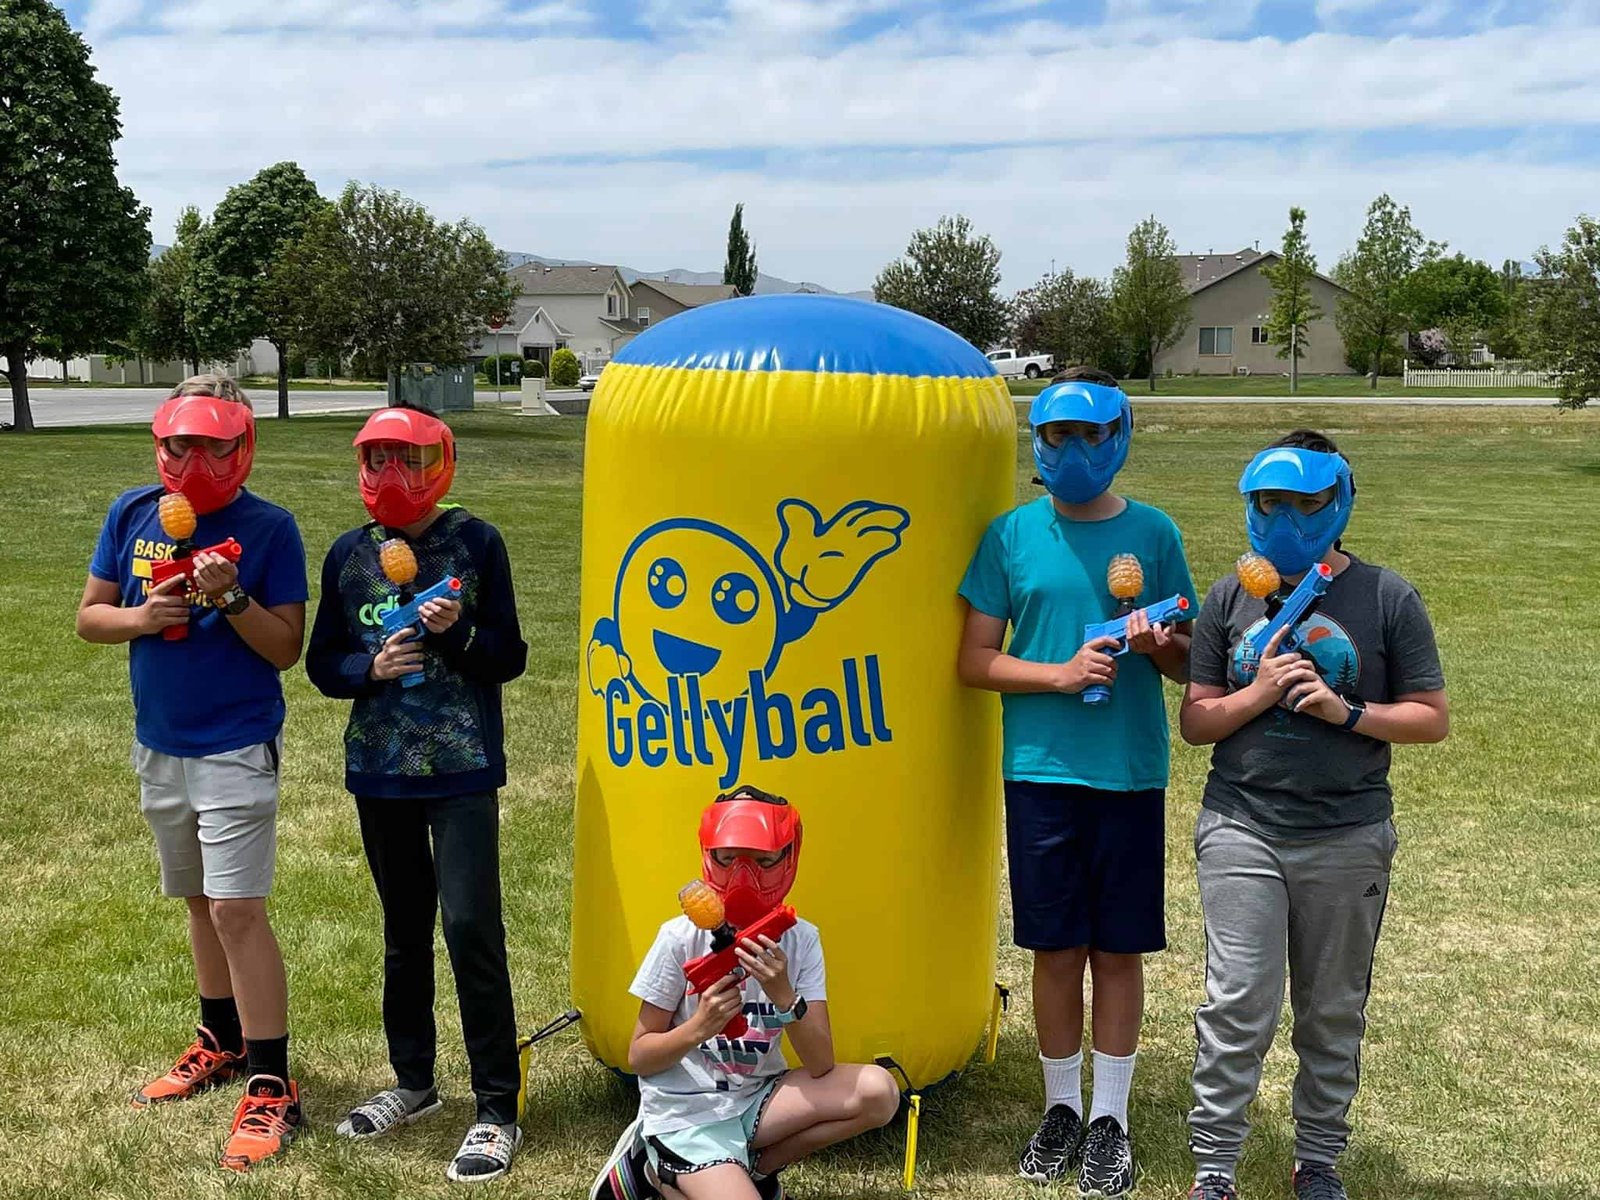 Outdoor Mobile GellyBall Party with GellyBall bunker